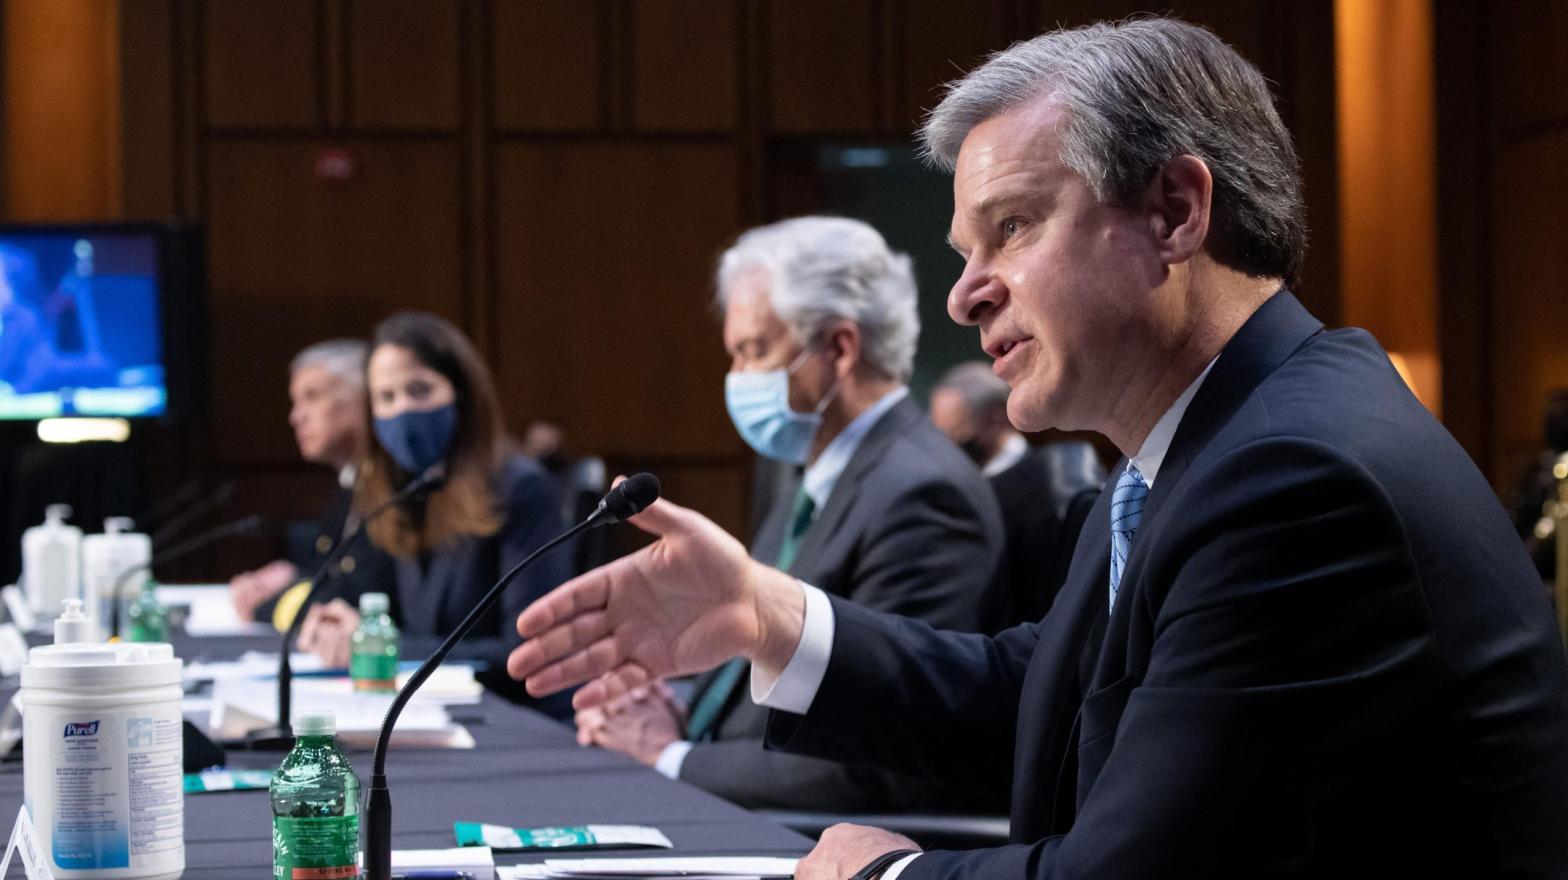 FBI Director Christopher Wray (R) testifies during a Senate Select Committee on Intelligence hearing about worldwide threats, on Capitol Hill in Washington, DC, April 14, 2021. (Photo: Saul Loeb, Getty Images)